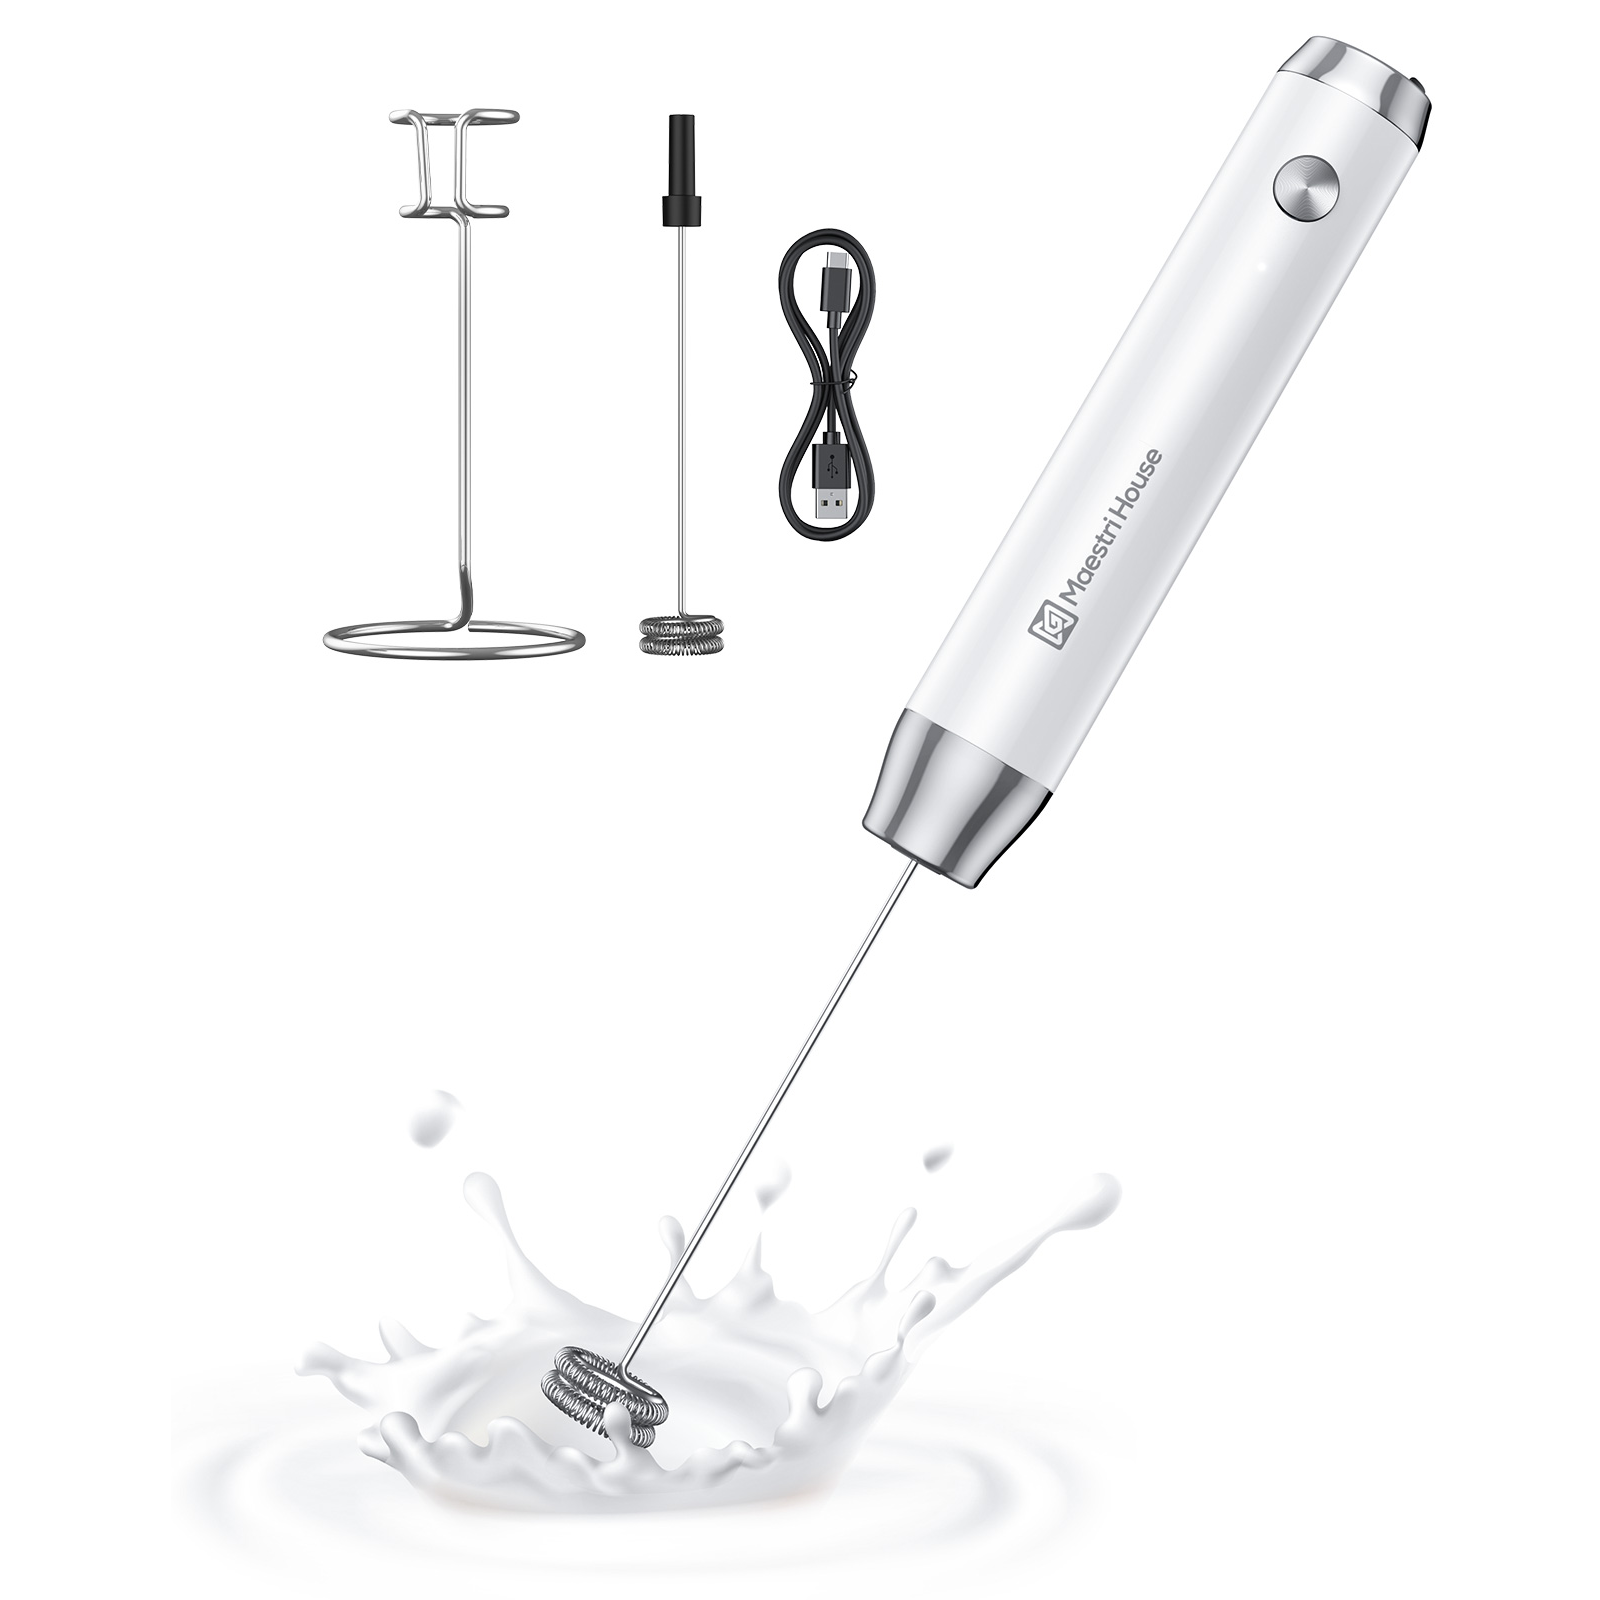  Handheld Milk Frother USB-C Rechargeable Electric